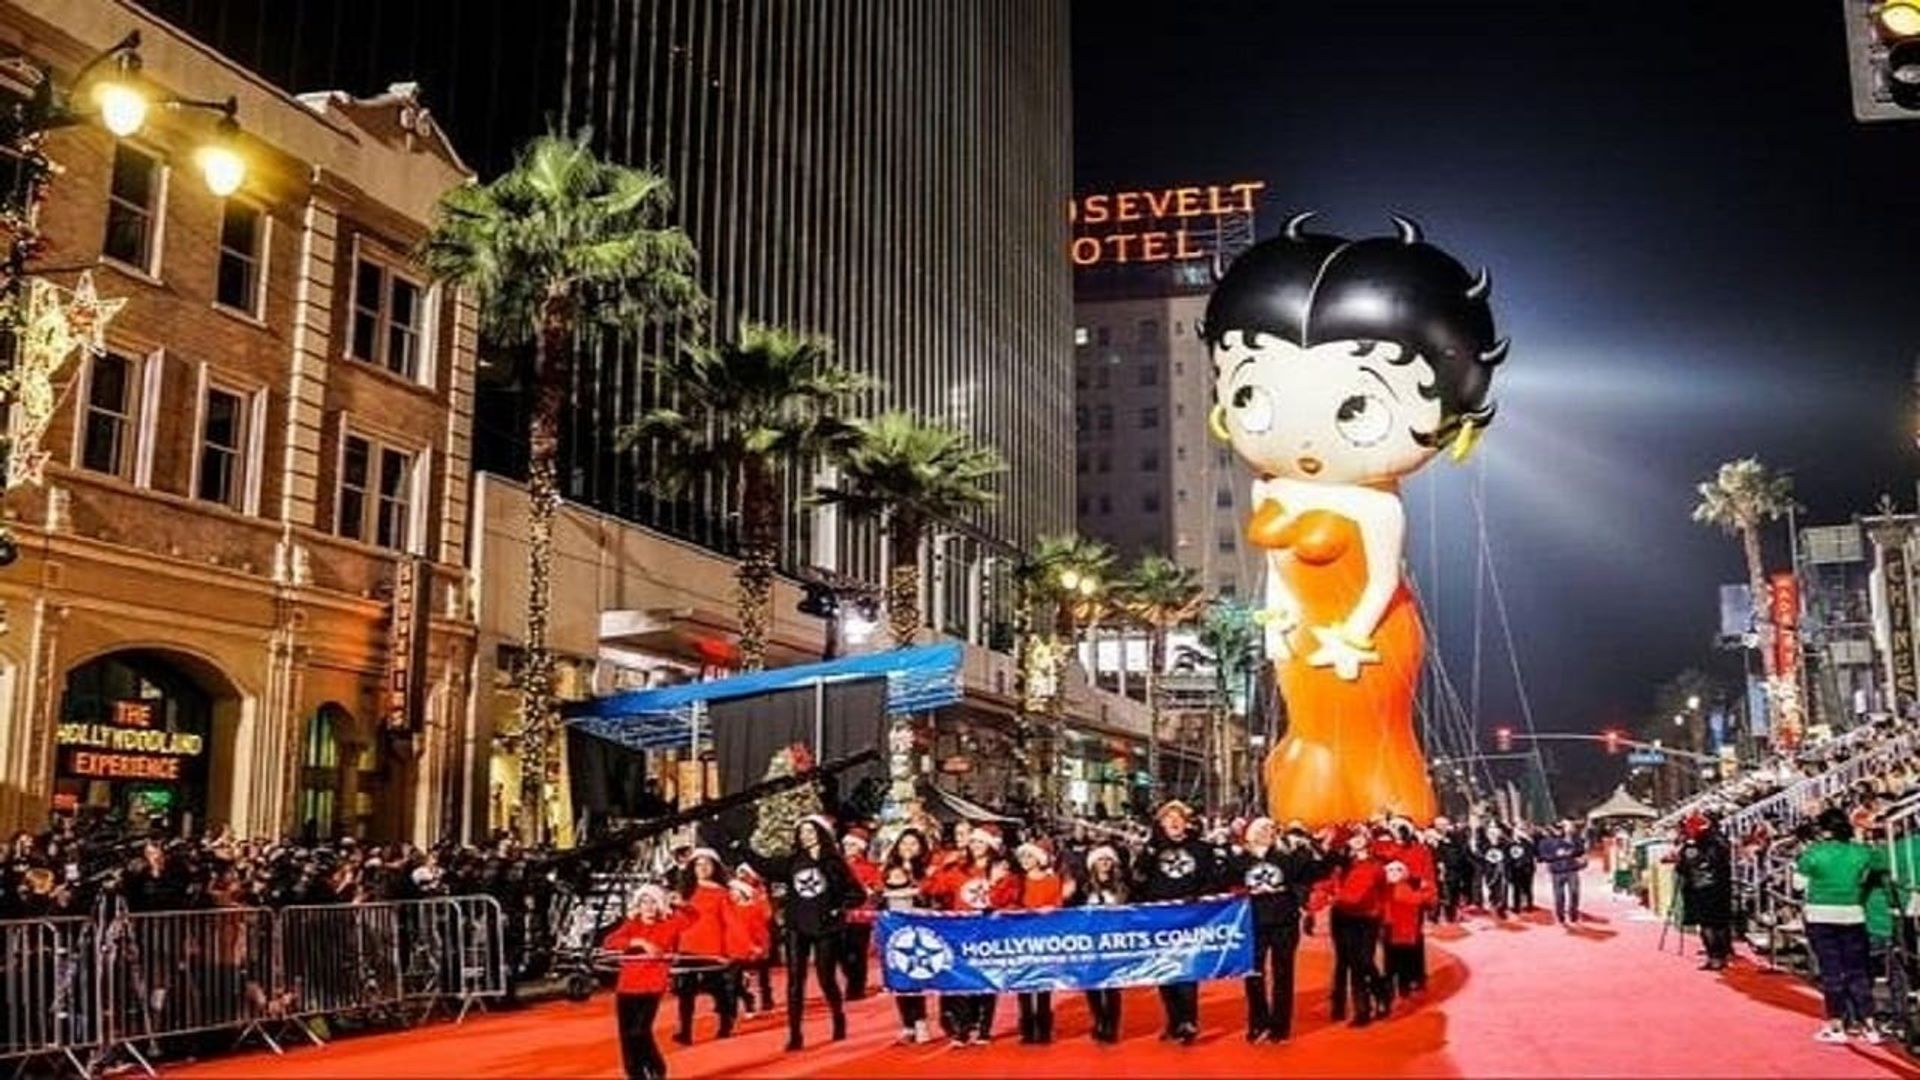 The 87th Annual Hollywood Christmas Parade background